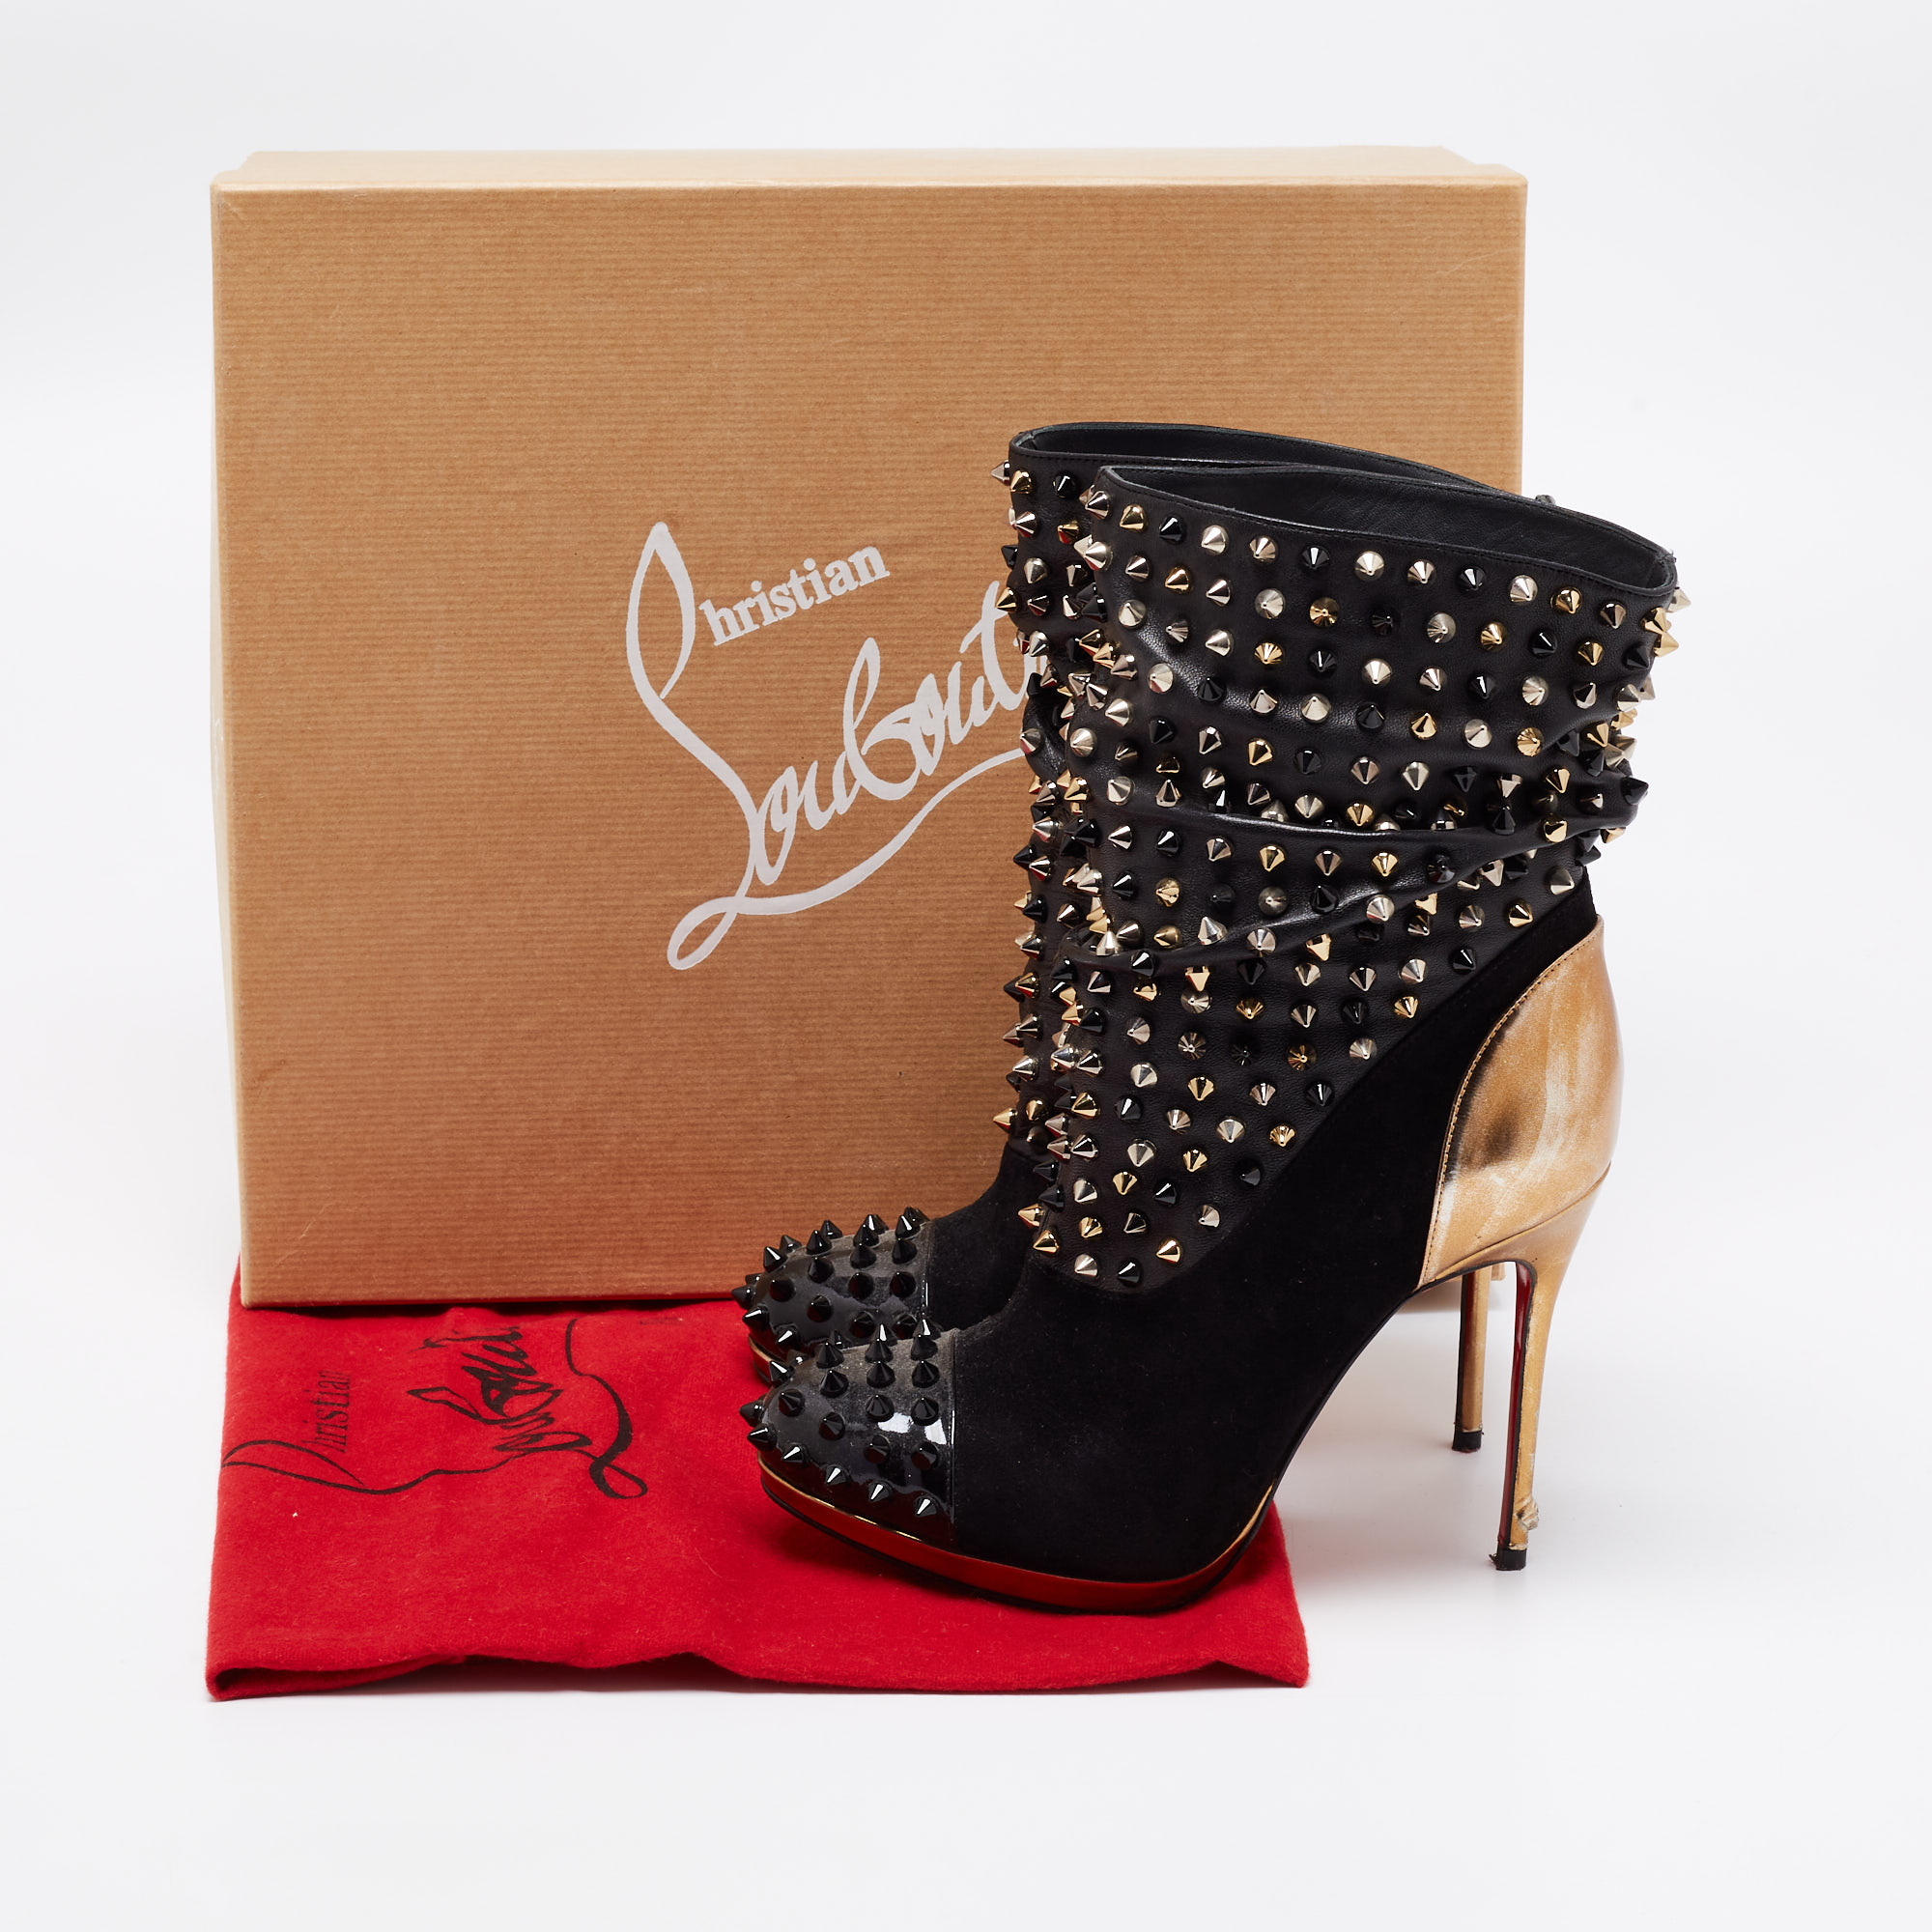 Christian Louboutin Black/Gold Suede, Patent And Leather Spike Wars Ankle Booties Size 35.5